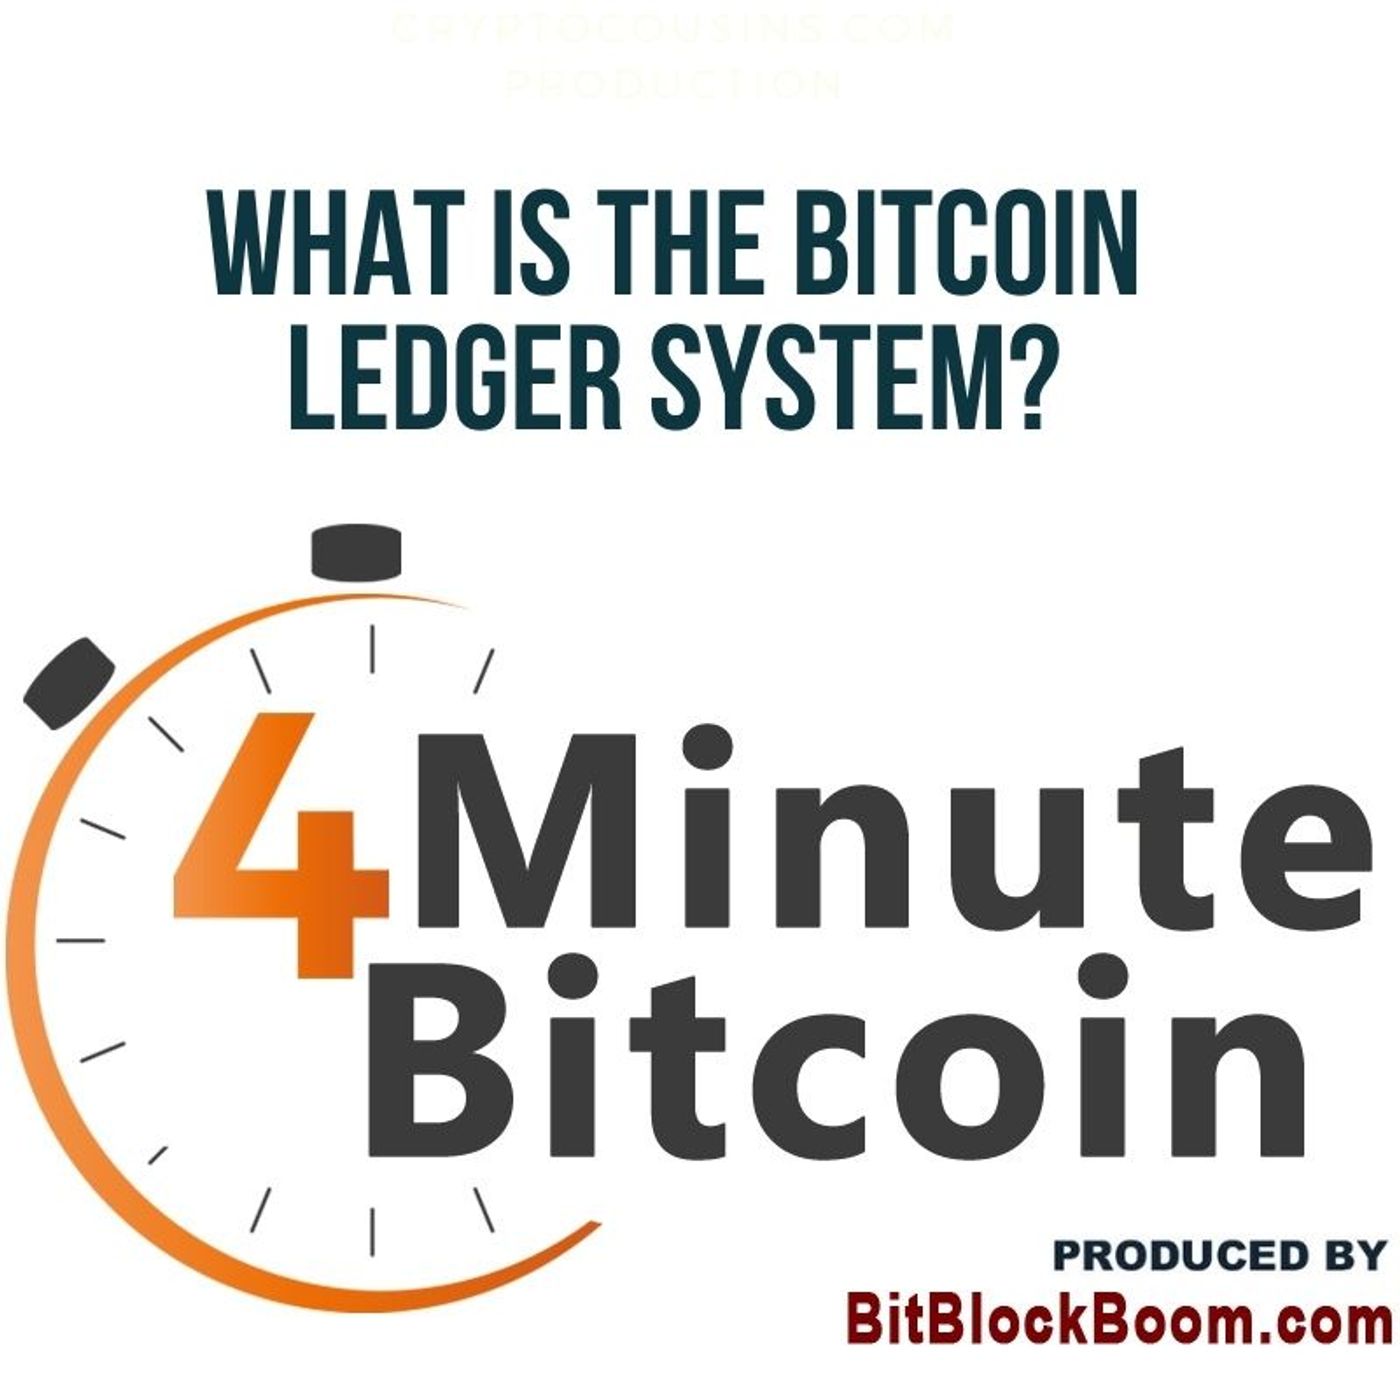 What Is The Bitcoin Ledger System?